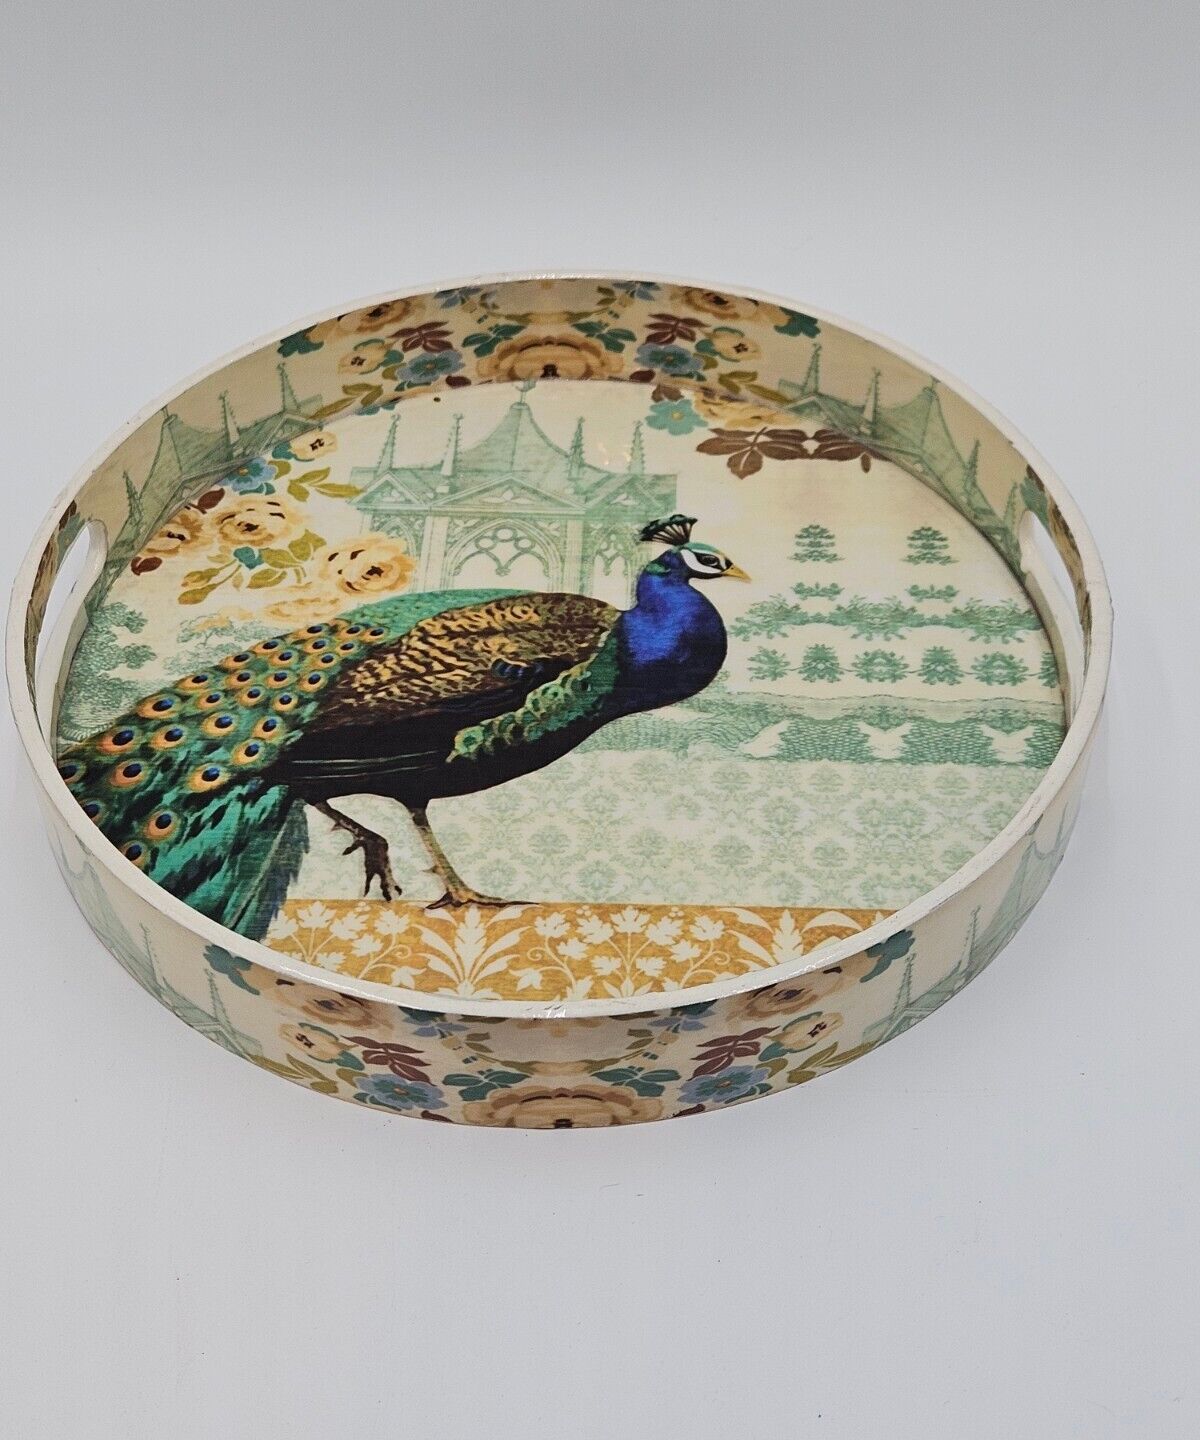 Vintage Circular Plastic Tray With Peacock And Handles Cookies Tea Serving 12 In